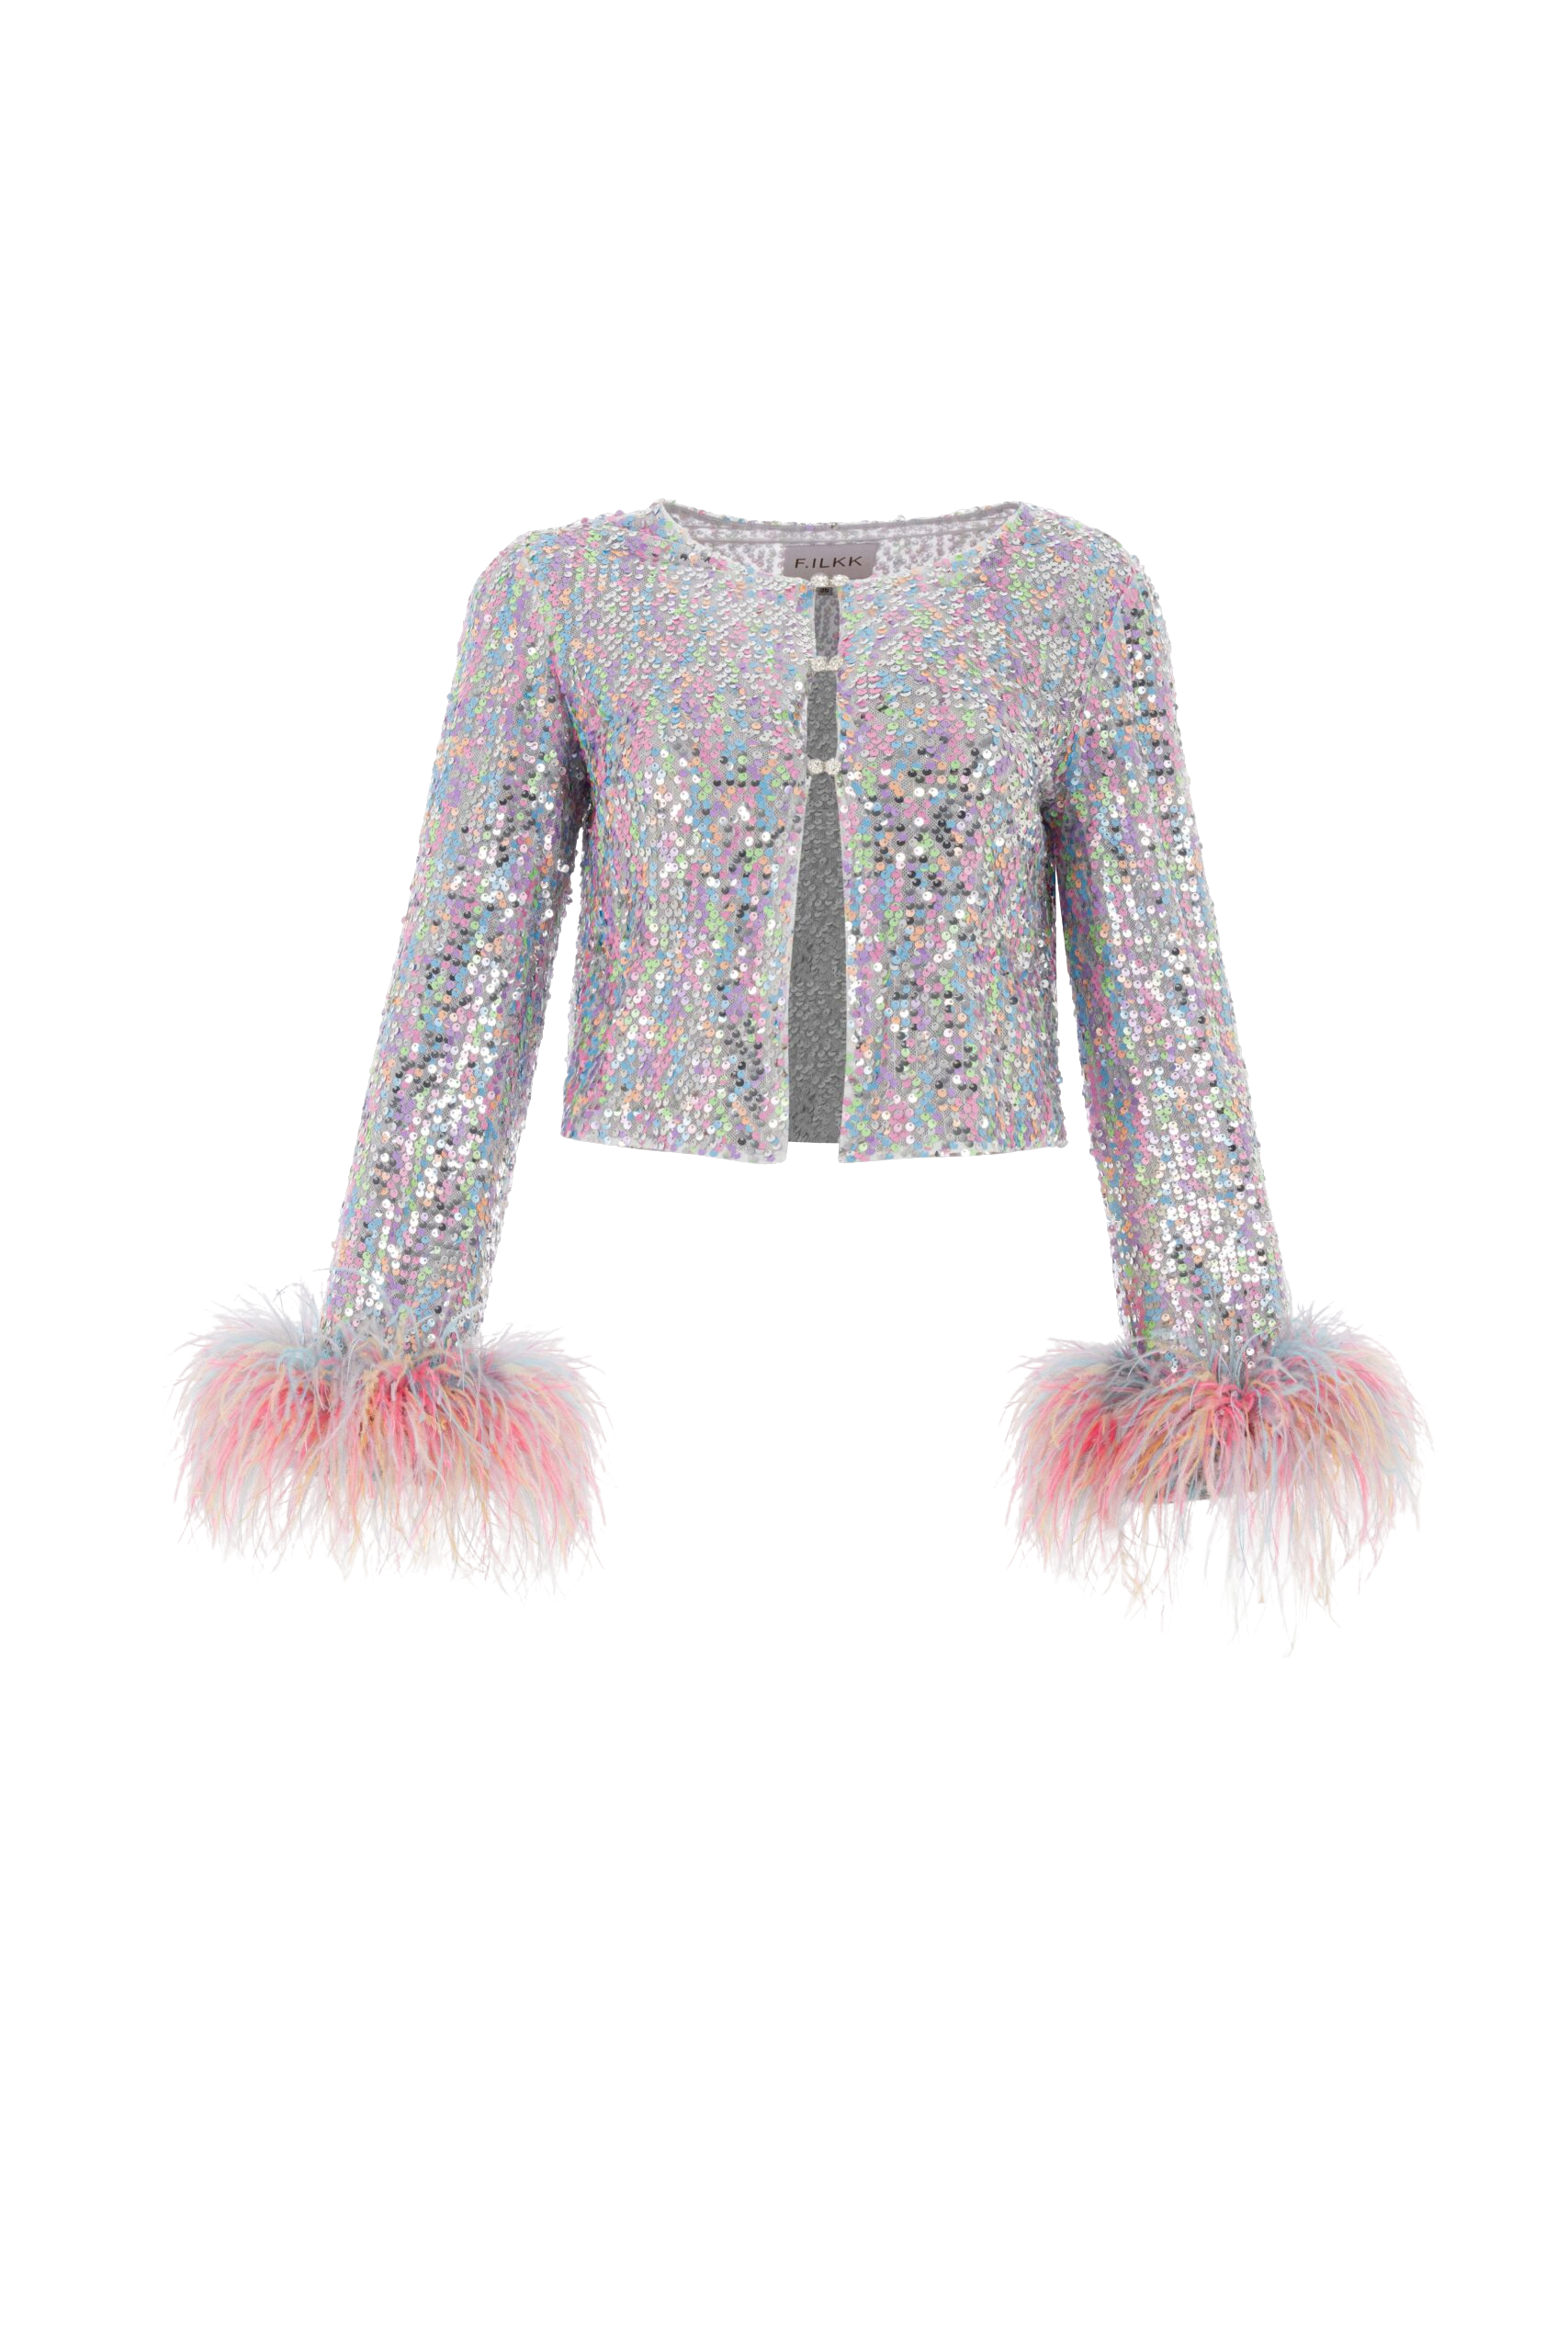 F.ilkk Sequined Feather Top With Rhinestone Clasp In Purple